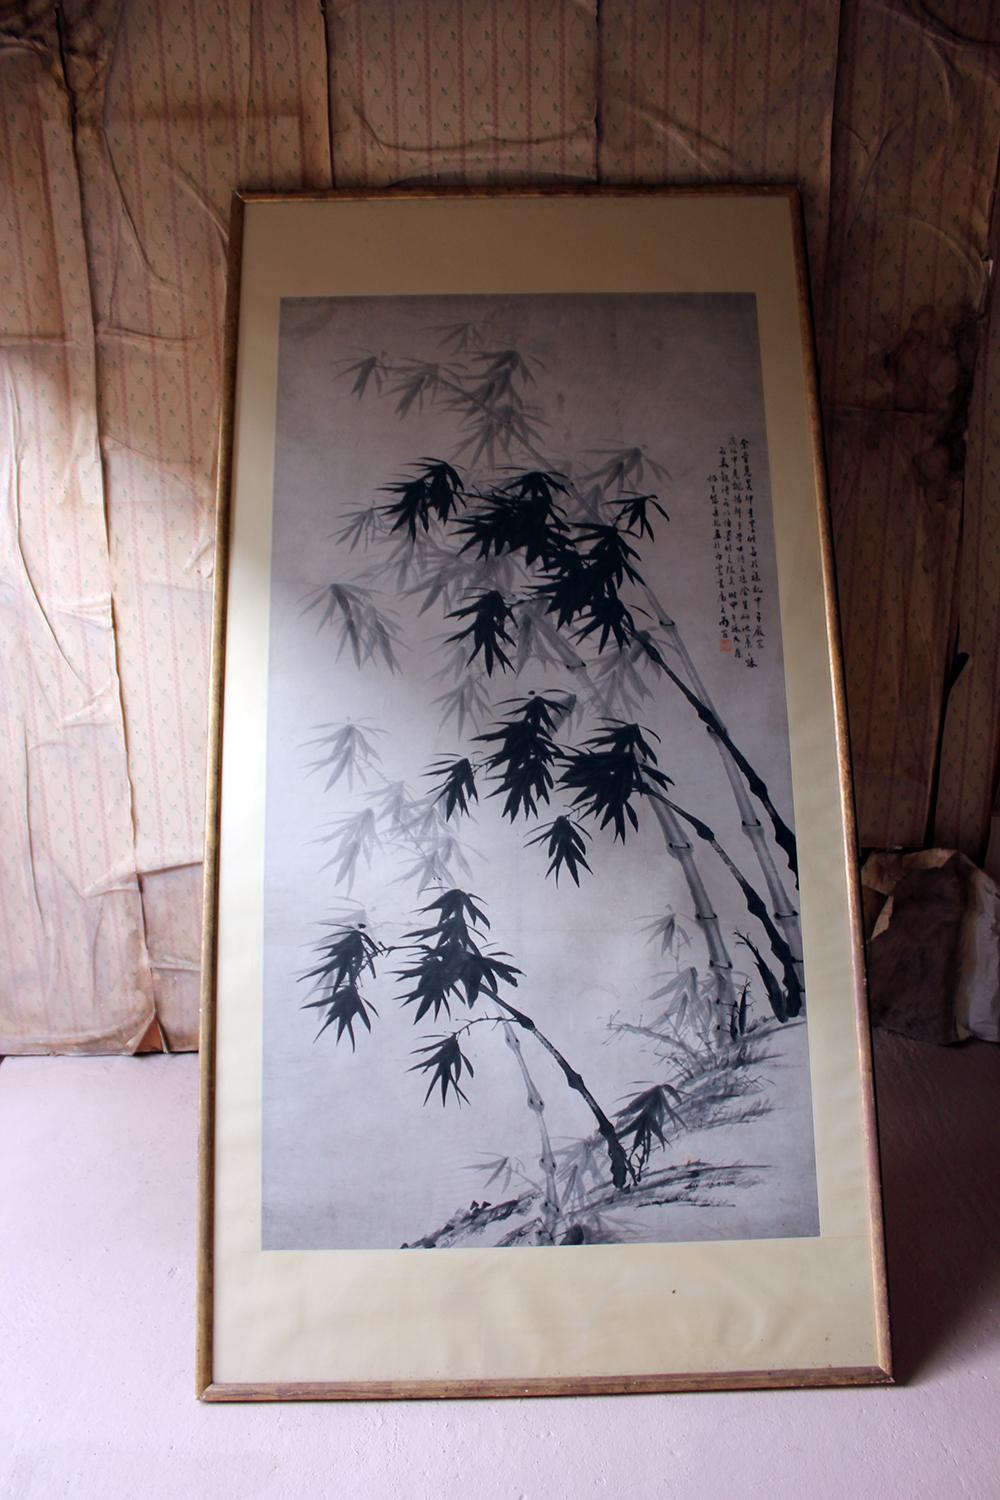 After 董其昌 Dong Qichang, Very Large Chinese Ink Painting of Bamboo, circa 1920-40 11